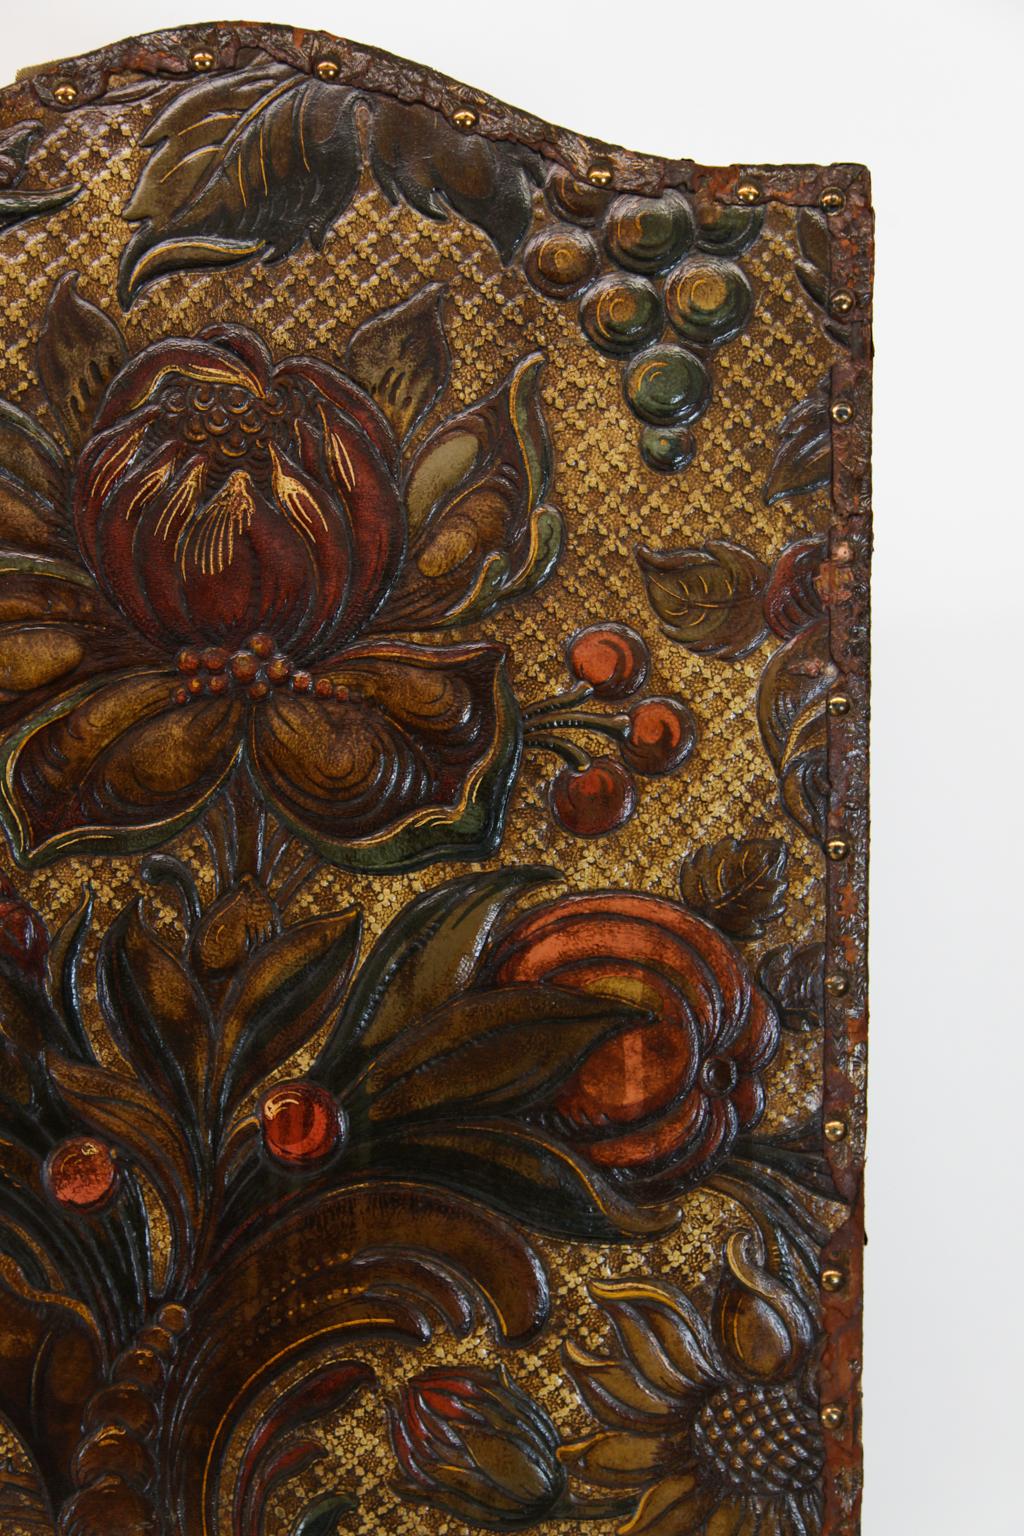 19th century embossed leather four fold screen, with a myriad of multi-color floral and foliate designs.